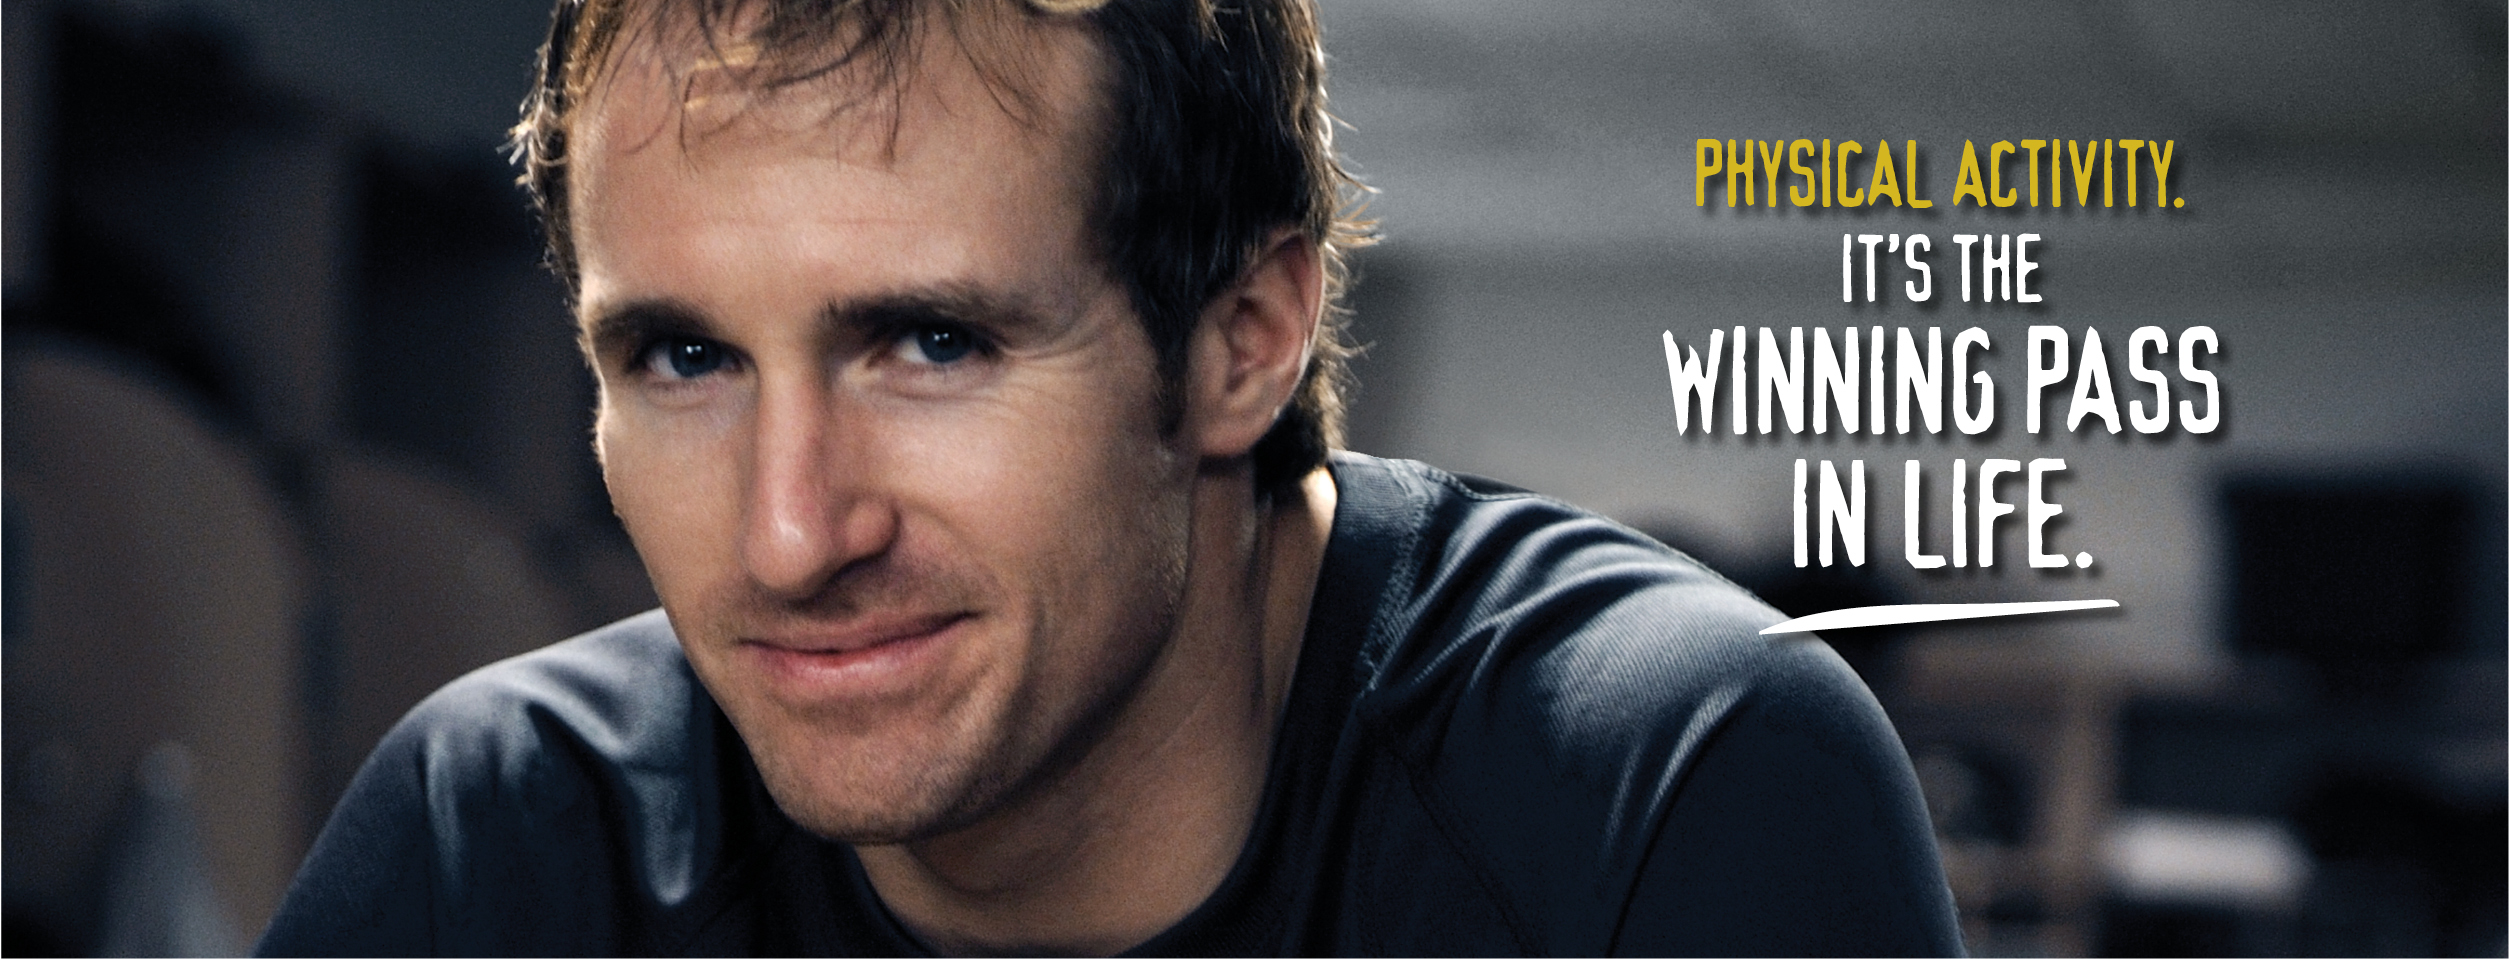 Drew Brees - Physical Activity - It's the Winning Pass in Life.